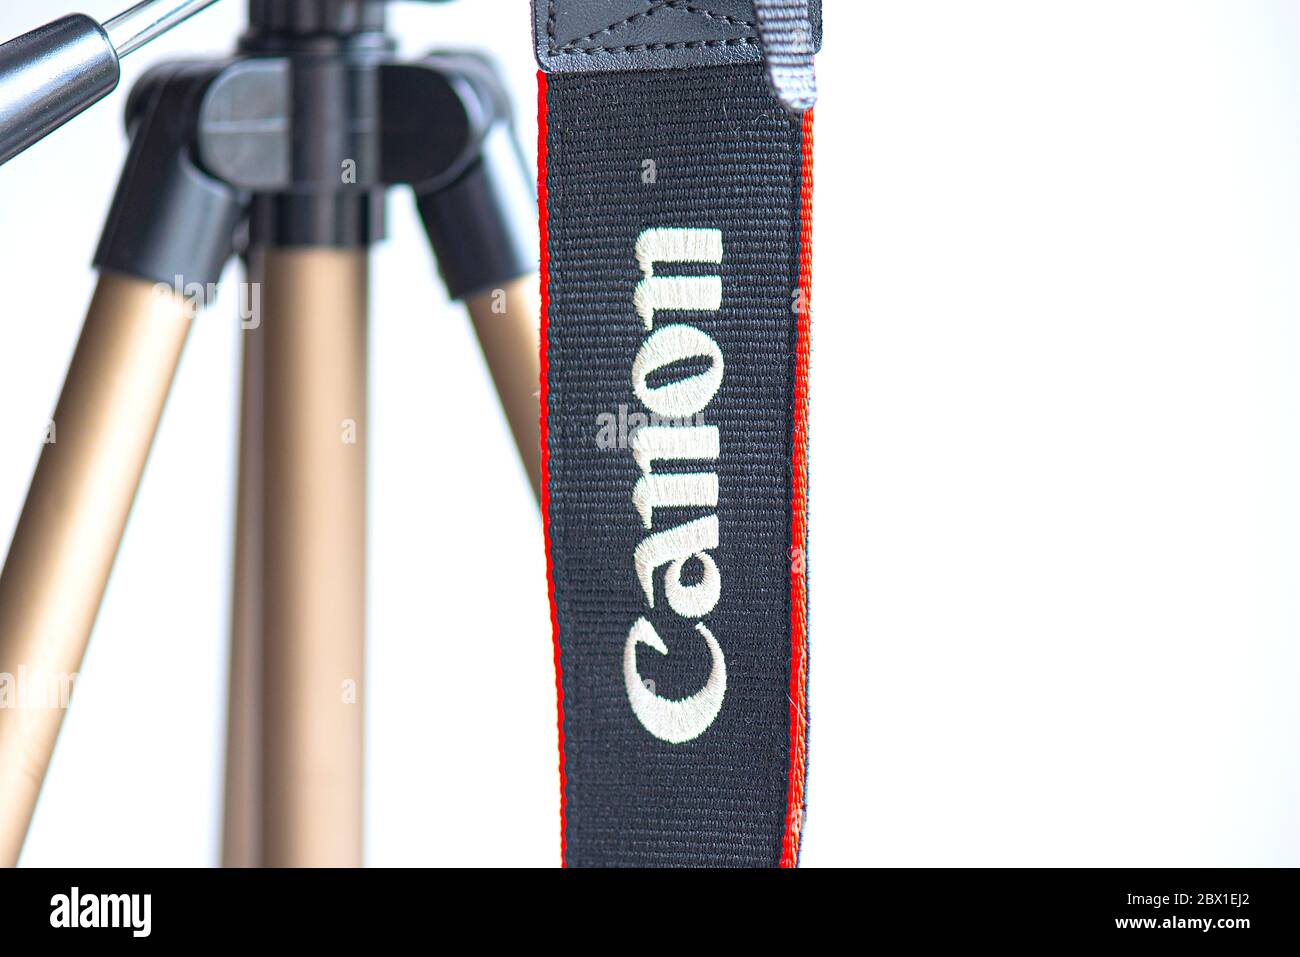 BERLIN - JUN 4: Close-up Canon camera belt or strap with Canon logotype in Berlin on June 04. 2020 in Germany Stock Photo